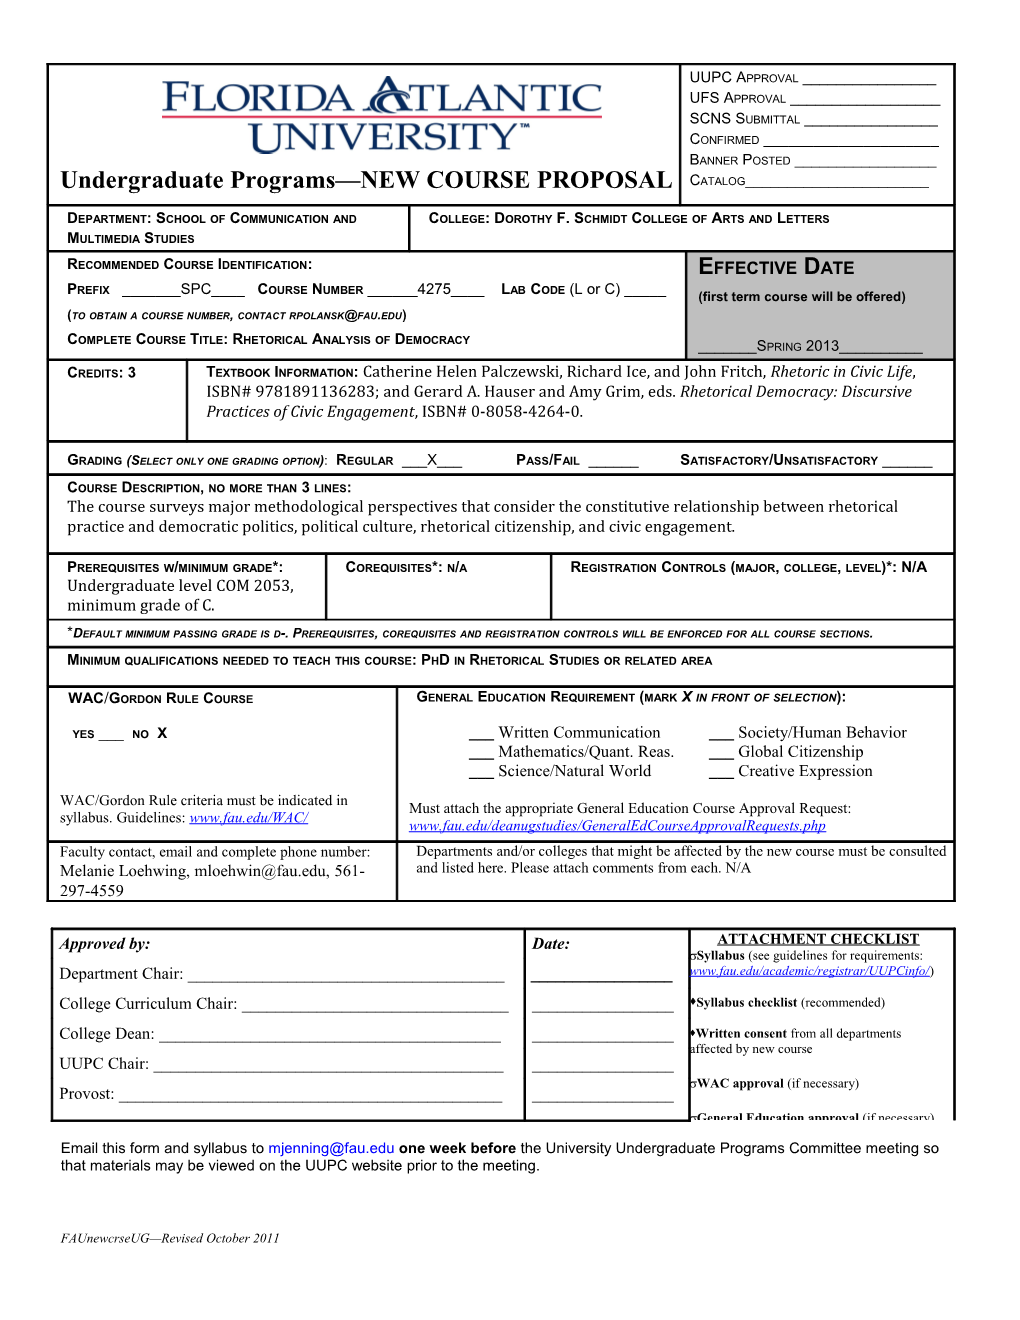 CD037, Course Termination Or Change Transmittal Form s9